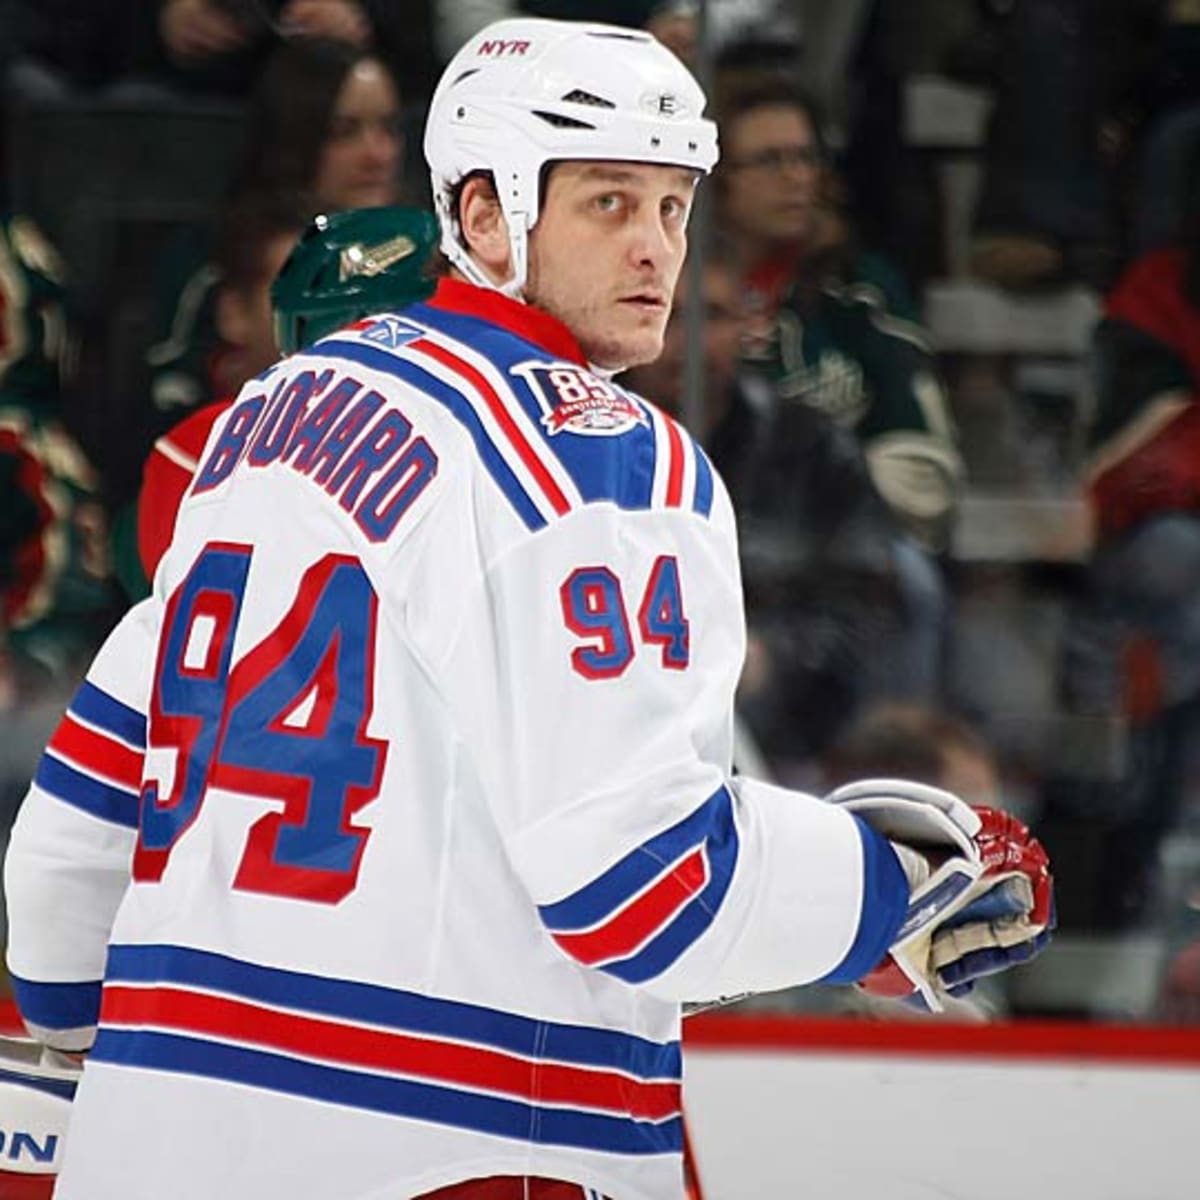 Derek Boogaard's Story Shows Why NHL Needs to Eliminate Enforcers